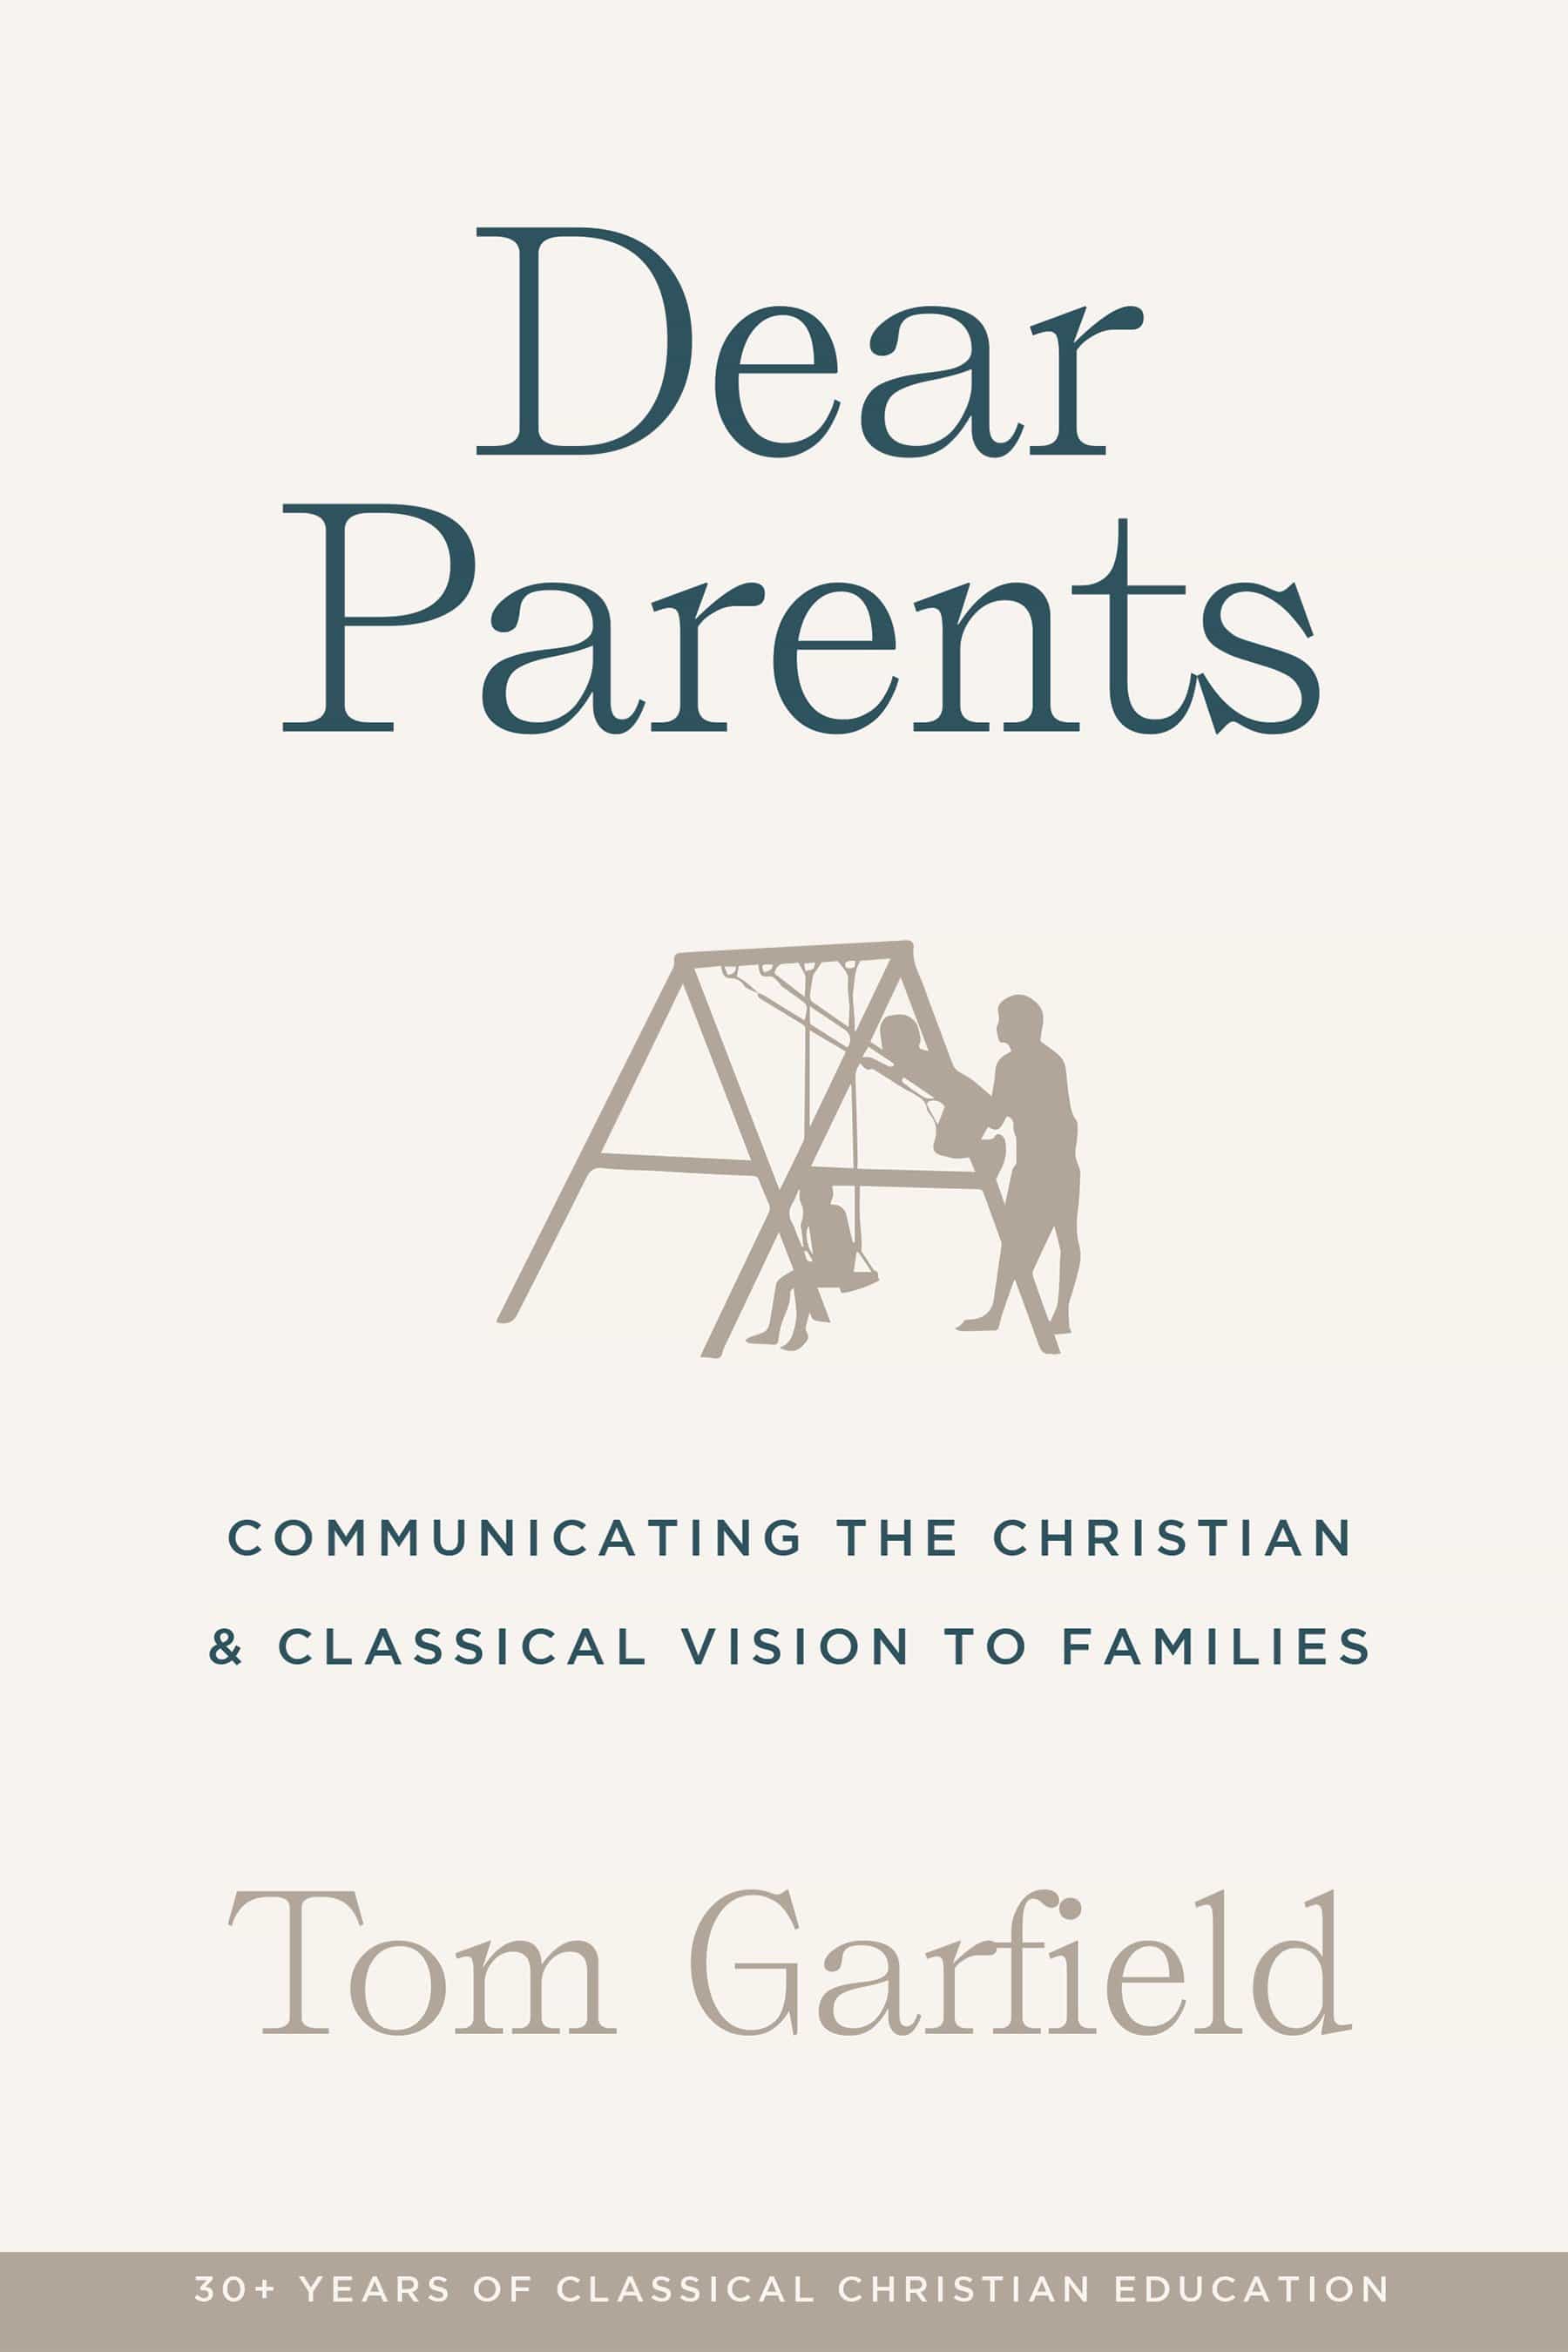 Dear Parents: Communicating the Christian & Classical Vision to Families